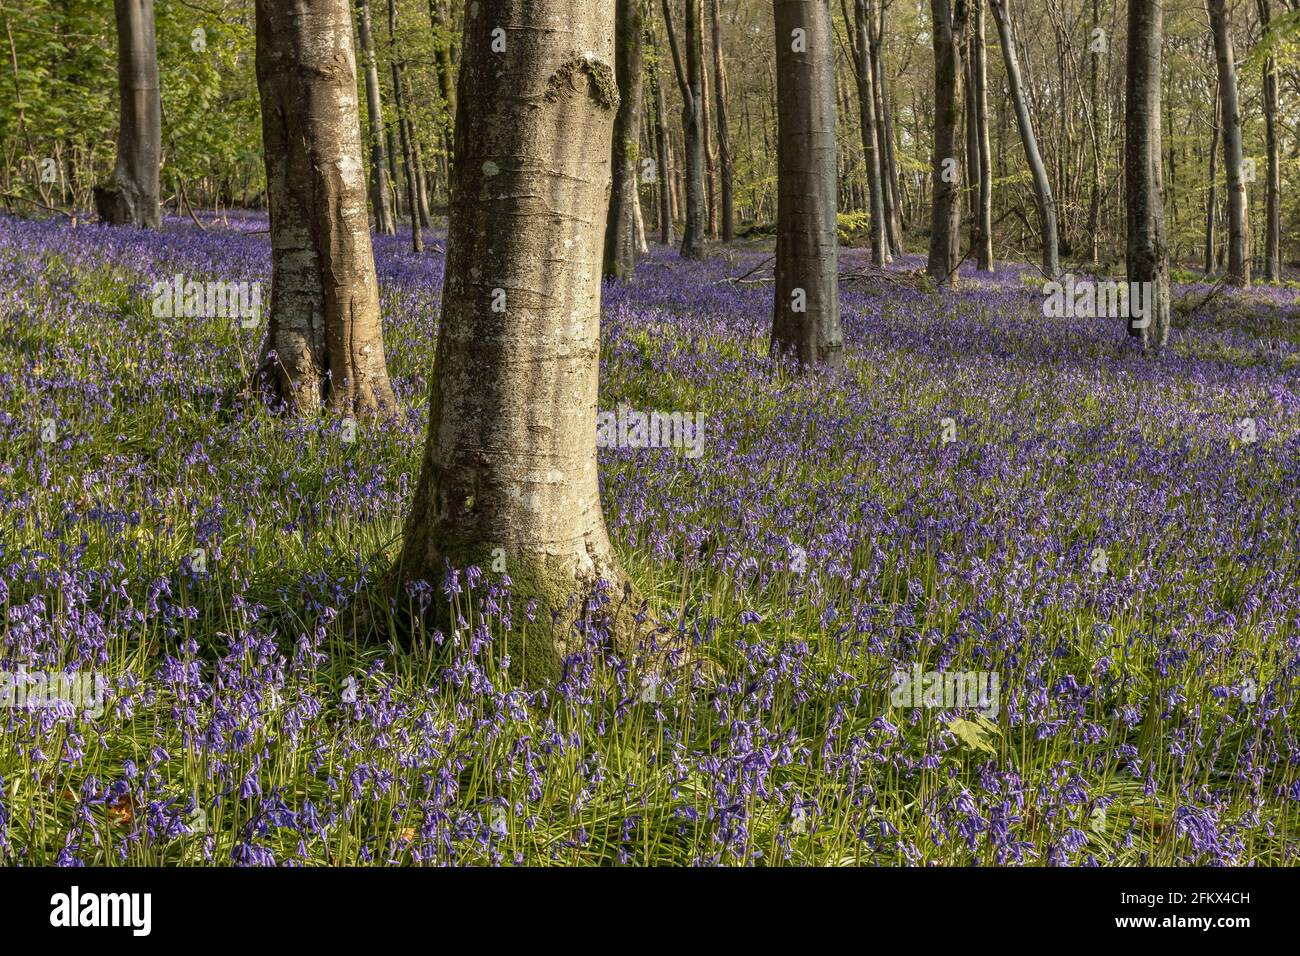 Bluebells in spring flowering in an ancient woodland, with bottom of trees visible Stock Photo